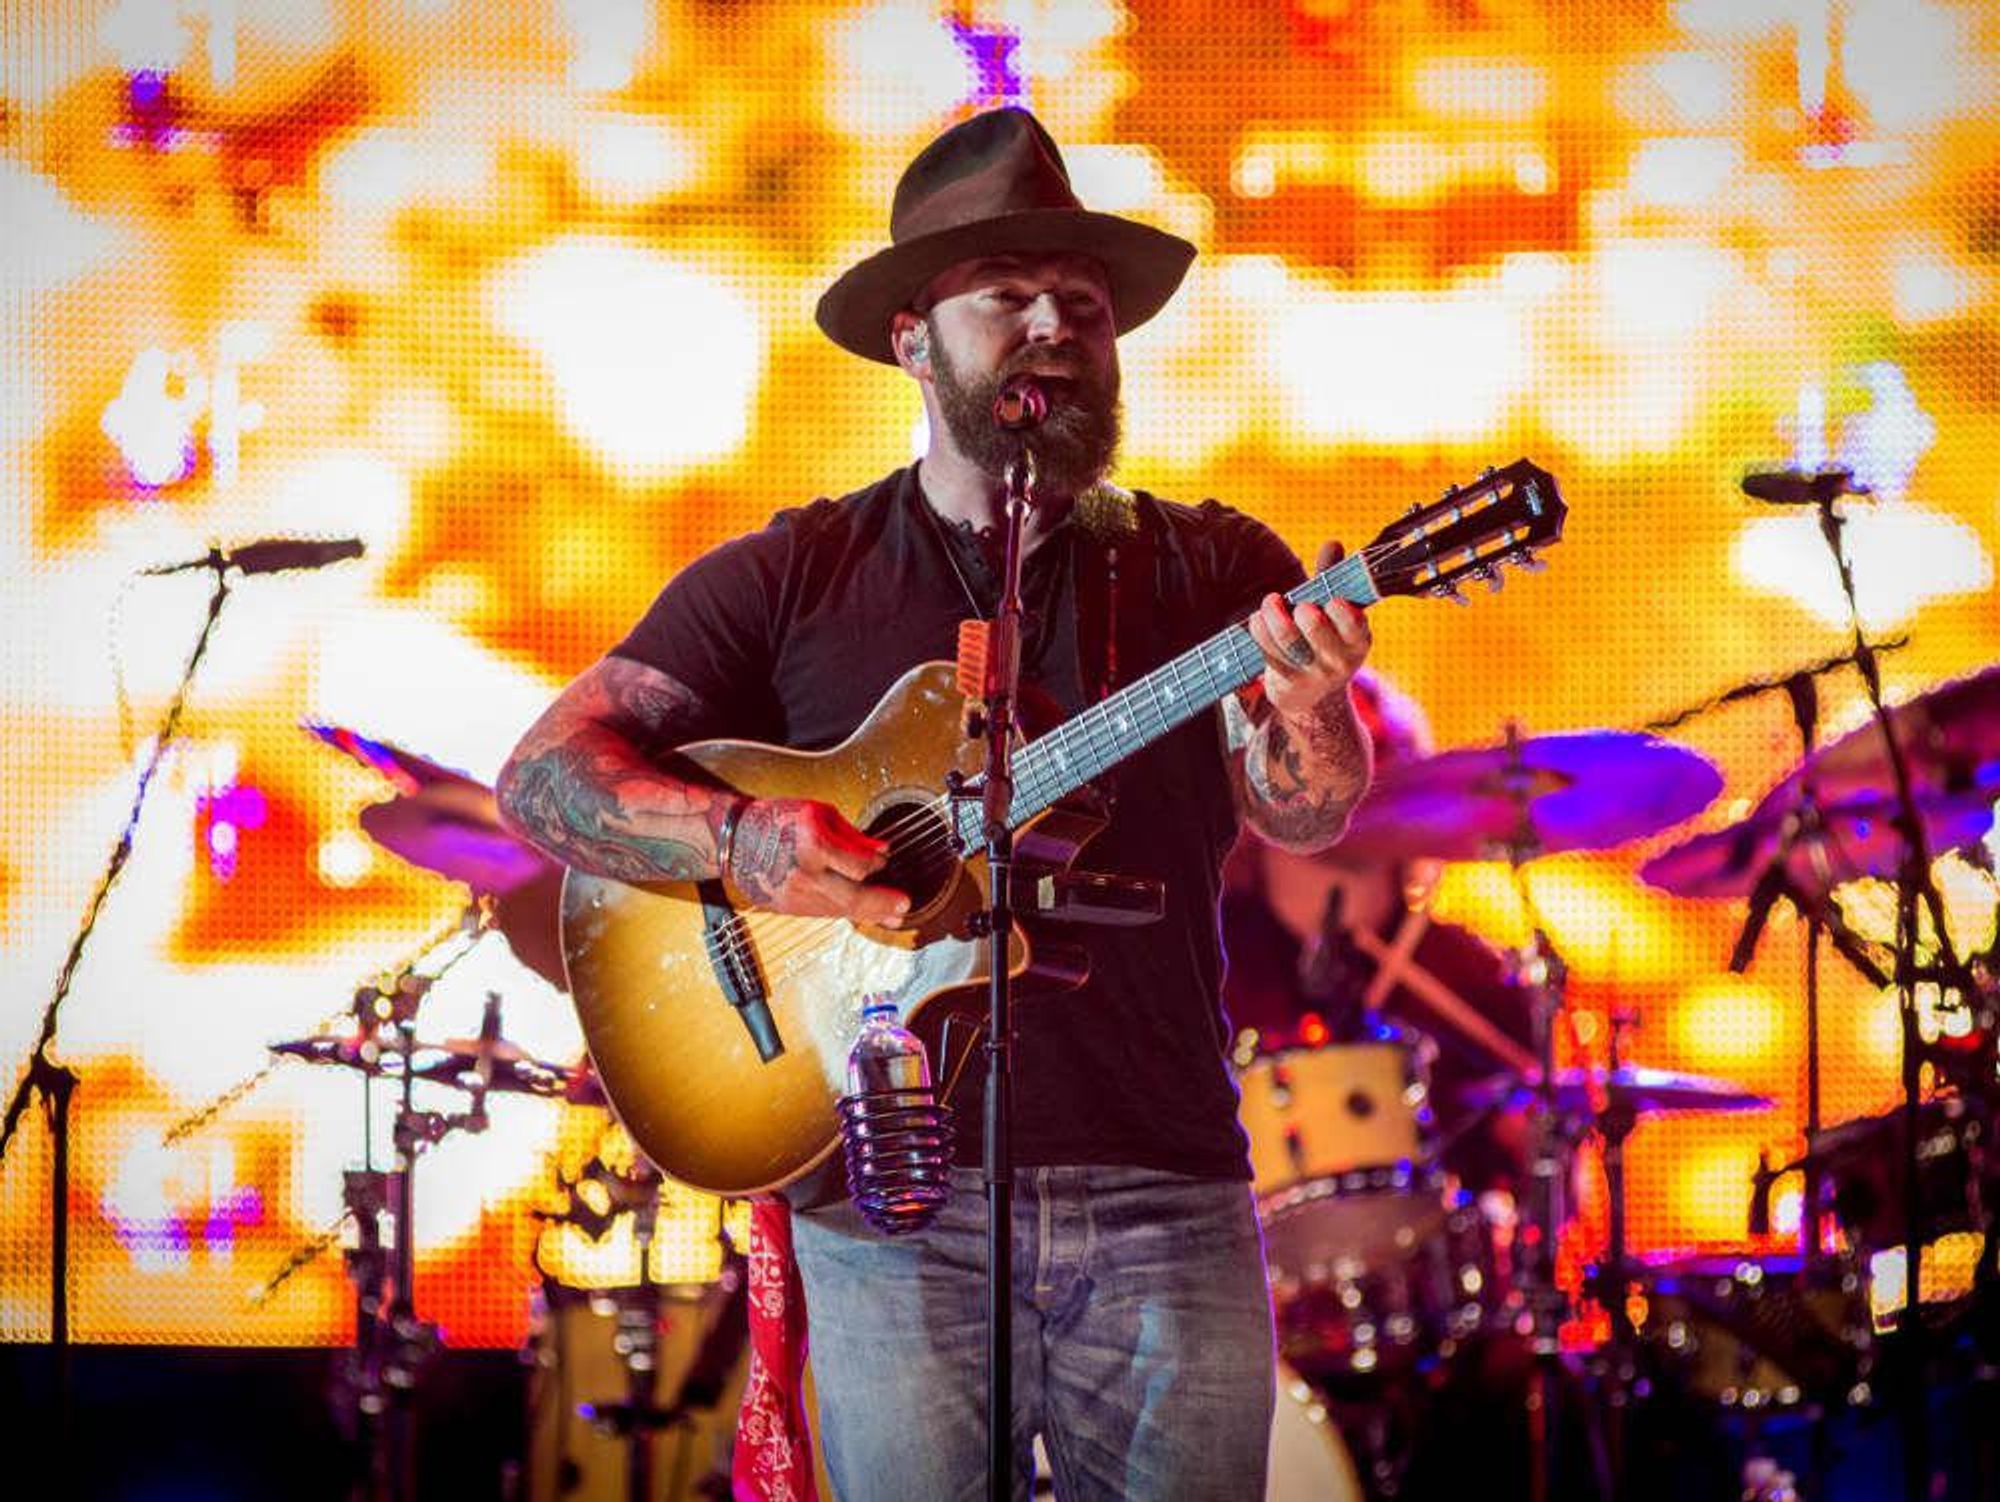 Zac Brown Band Zac Brown mid-song singing